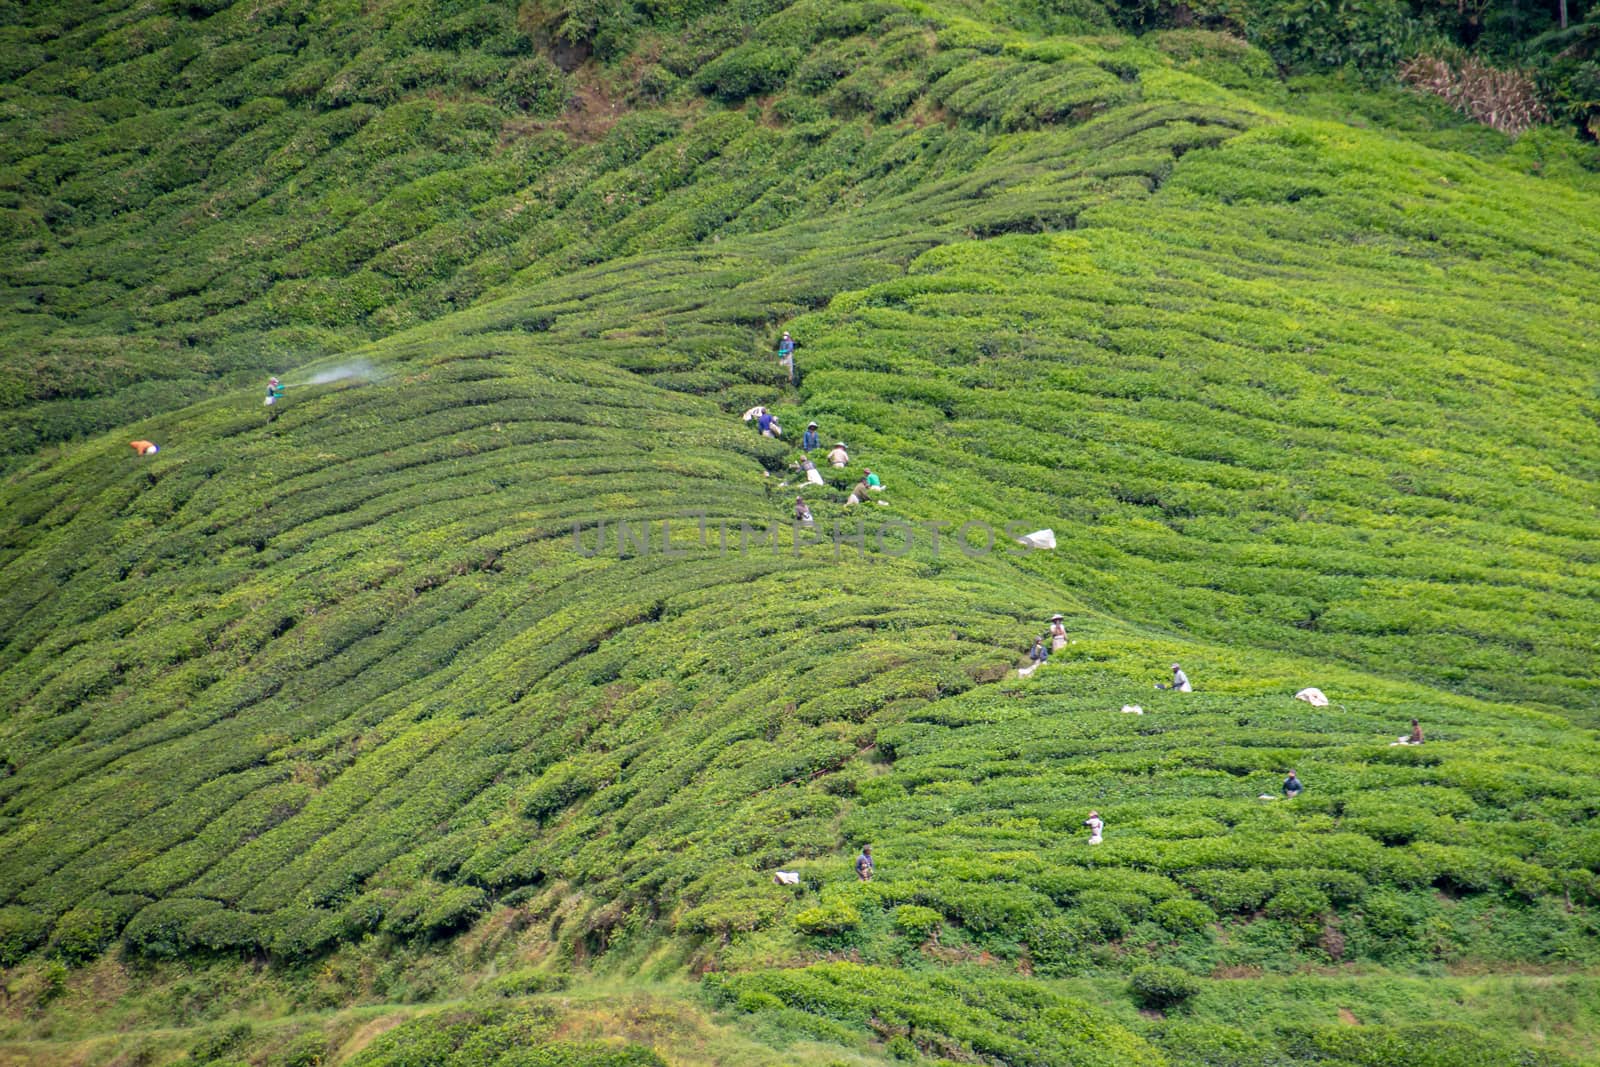 Workers at tea plantation harvesting tea leaves and spraying poison by MXW_Stock